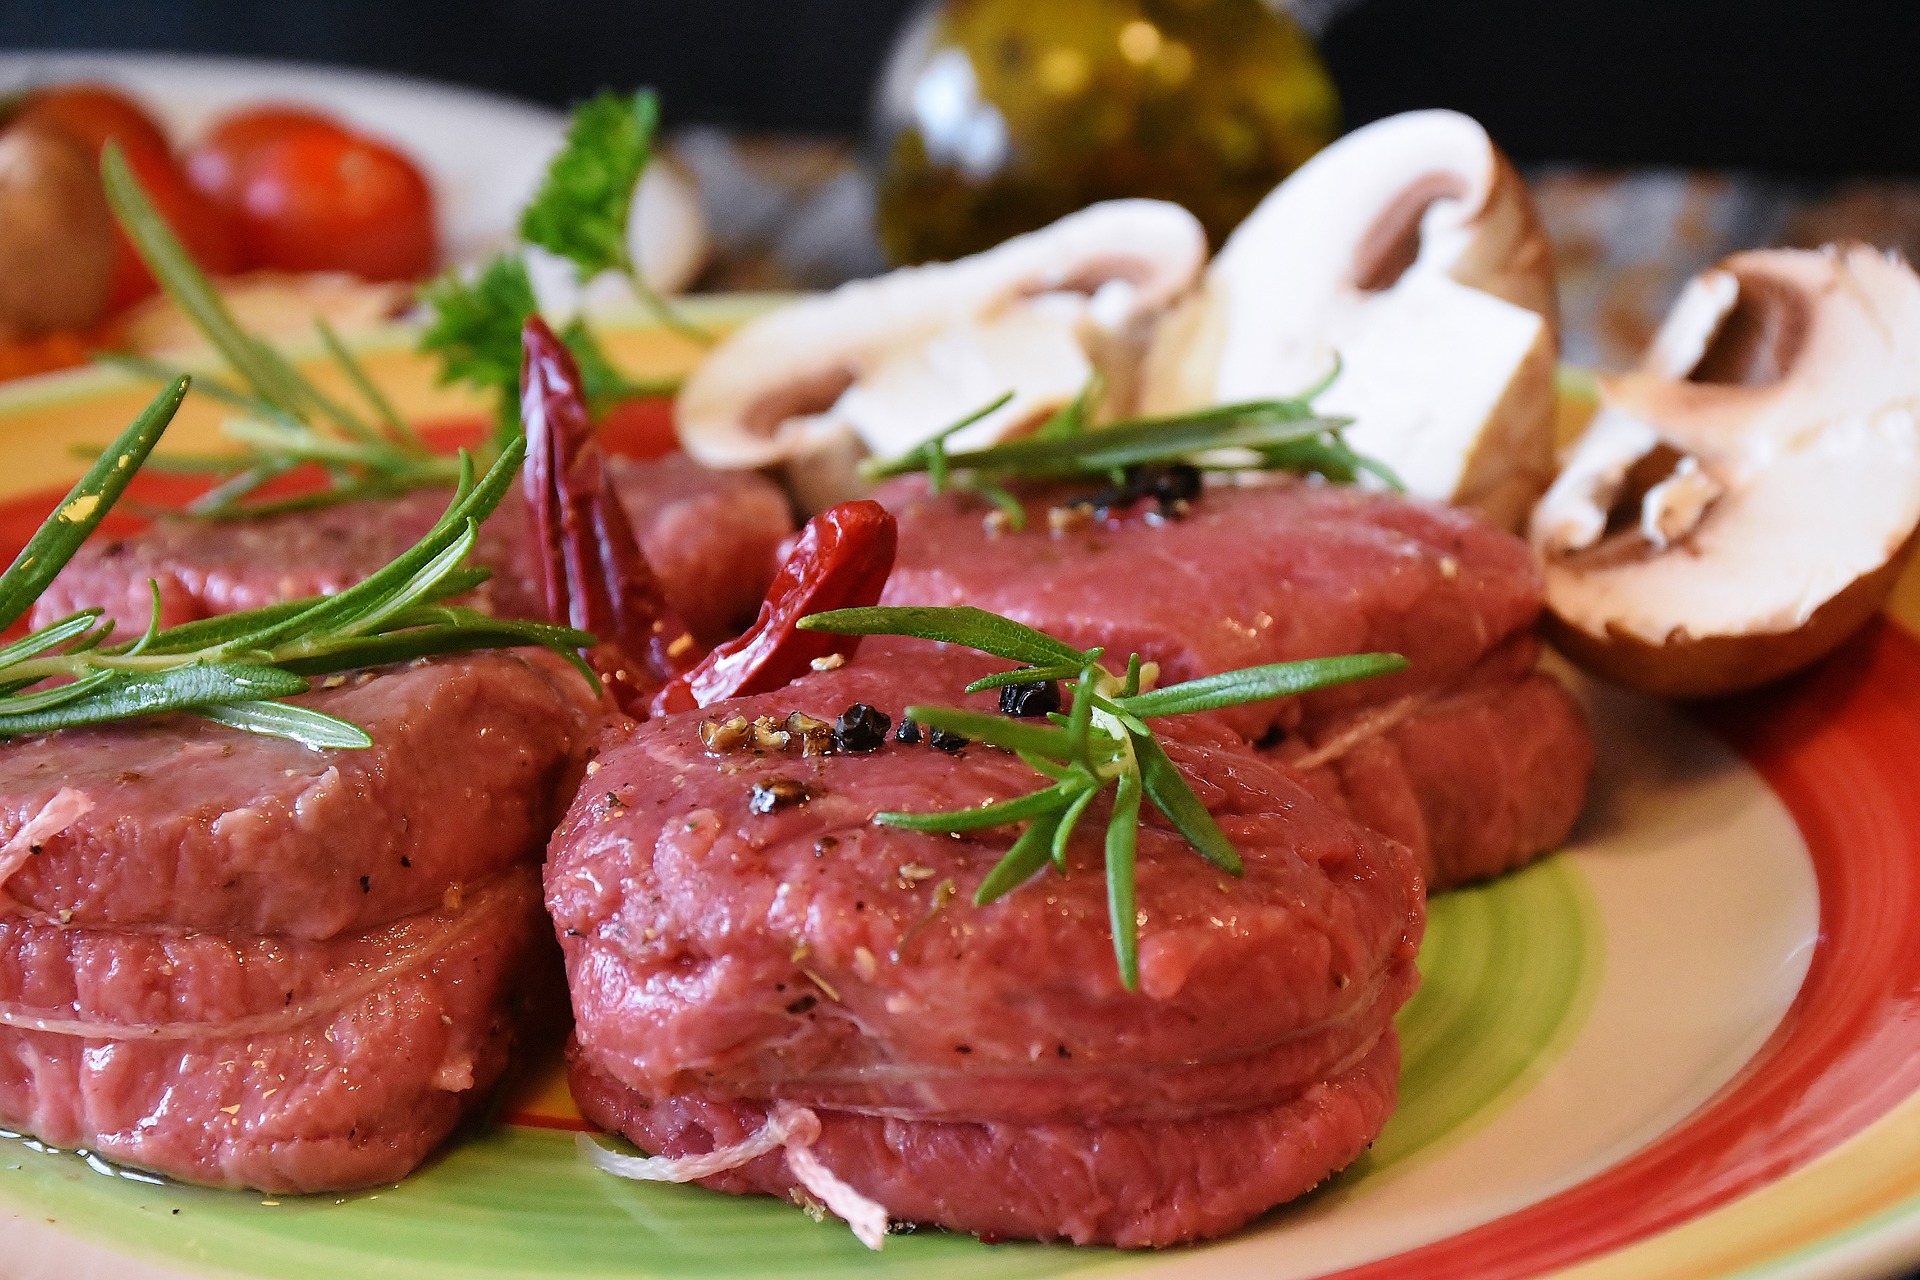 Red meat increases the risk of heart disease